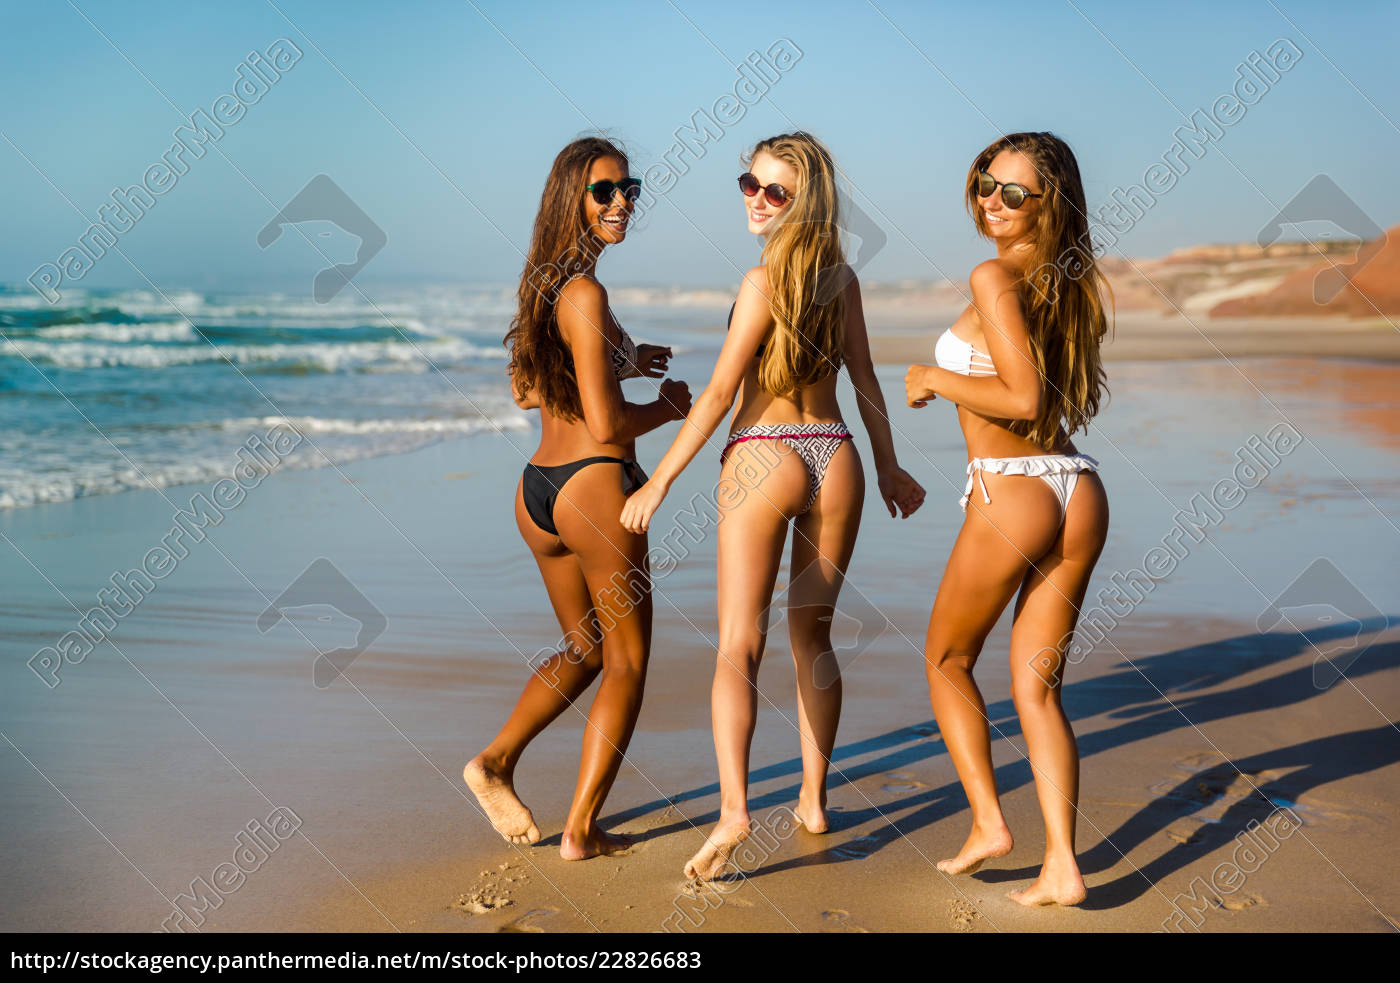 daryl mcshane recommends playa mujeres hermosas pic